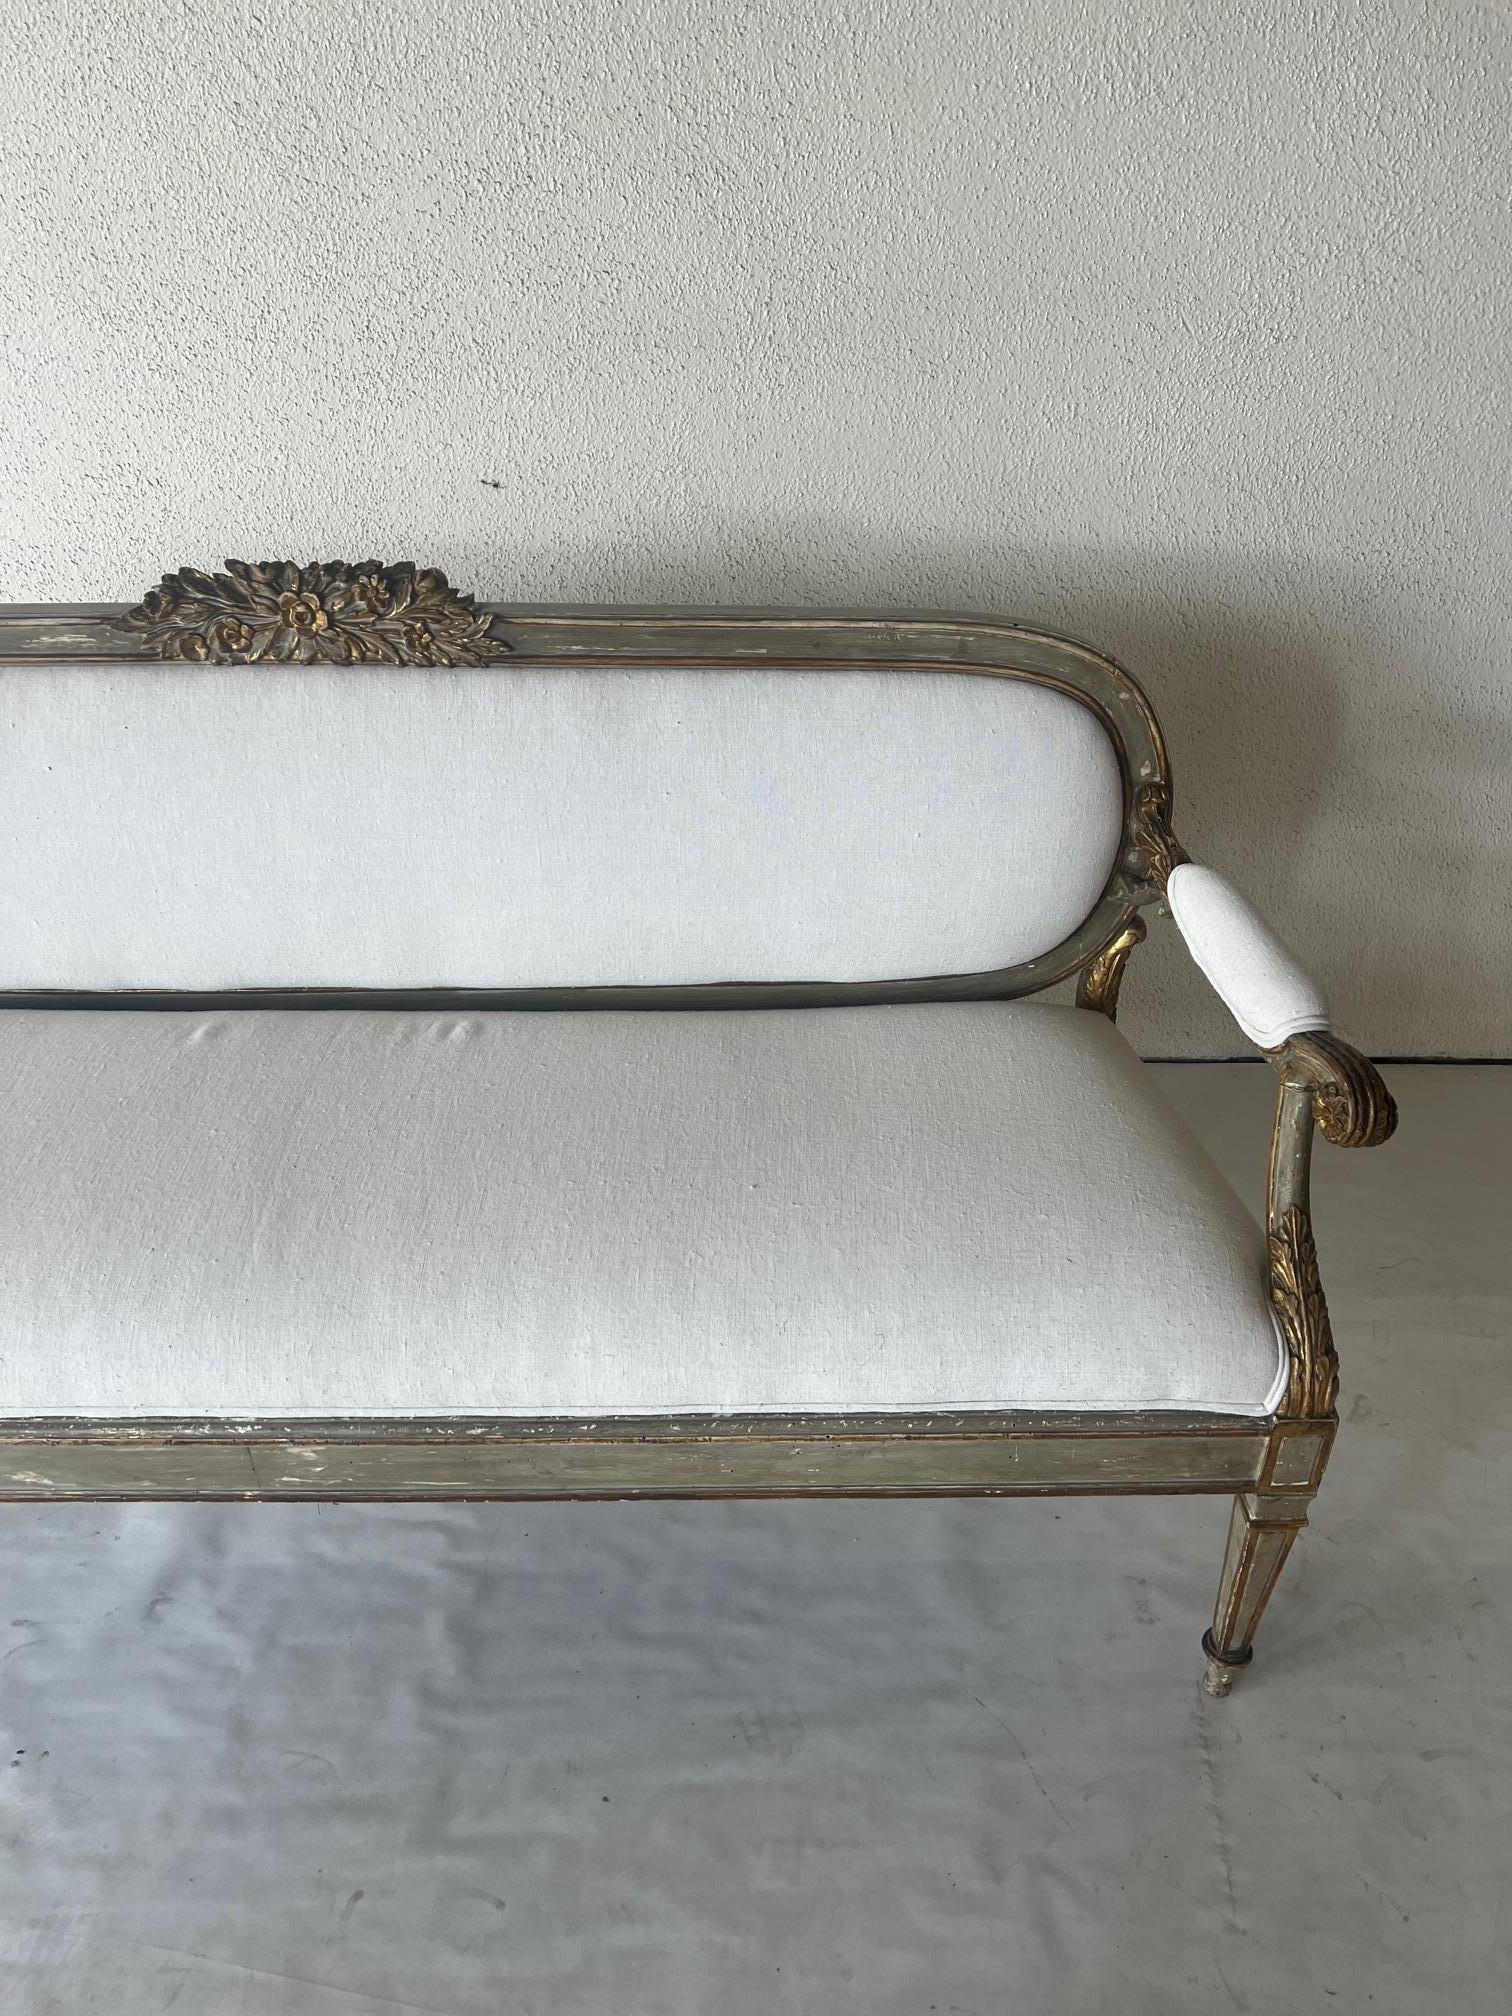 Stunning 18th Century Settee with gilded accents and new upholstery. Frame has a beautiful faux finish and great age.